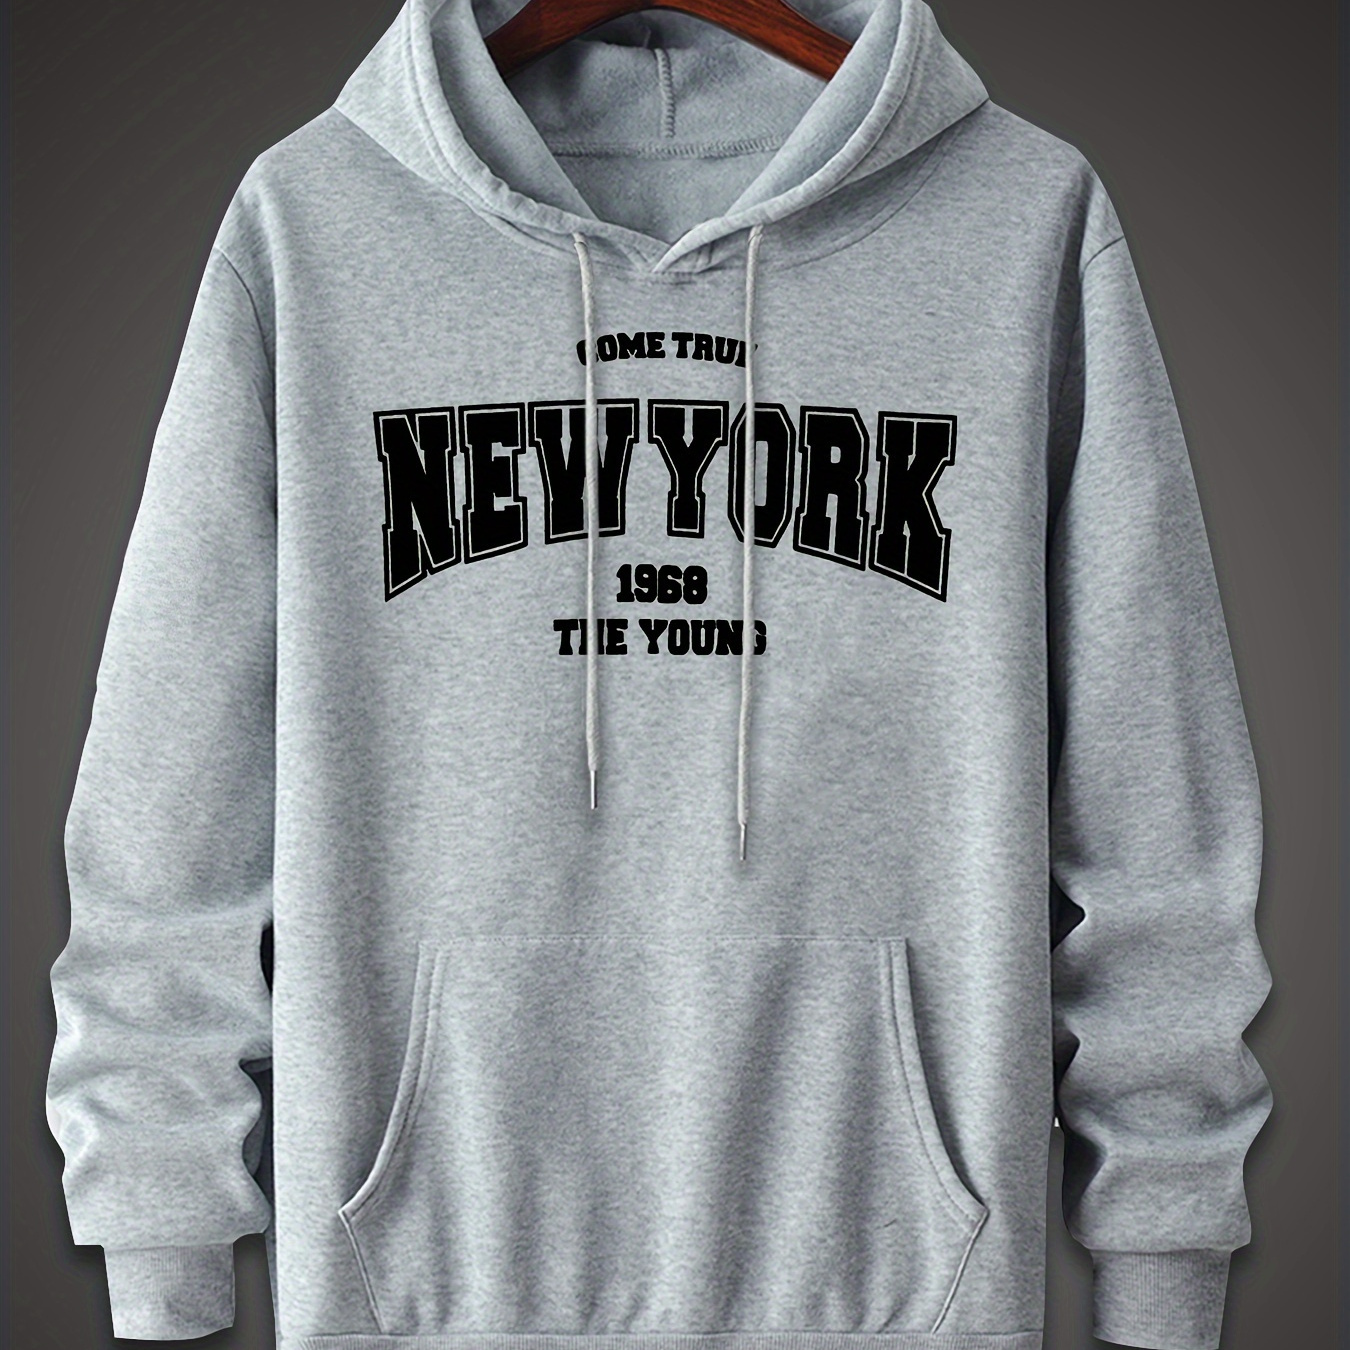 

New York Pattern, Men's Trendy Comfy Hoodie, Casual Slightly Stretch Breathable Hooded Sweatshirt For Outdoor